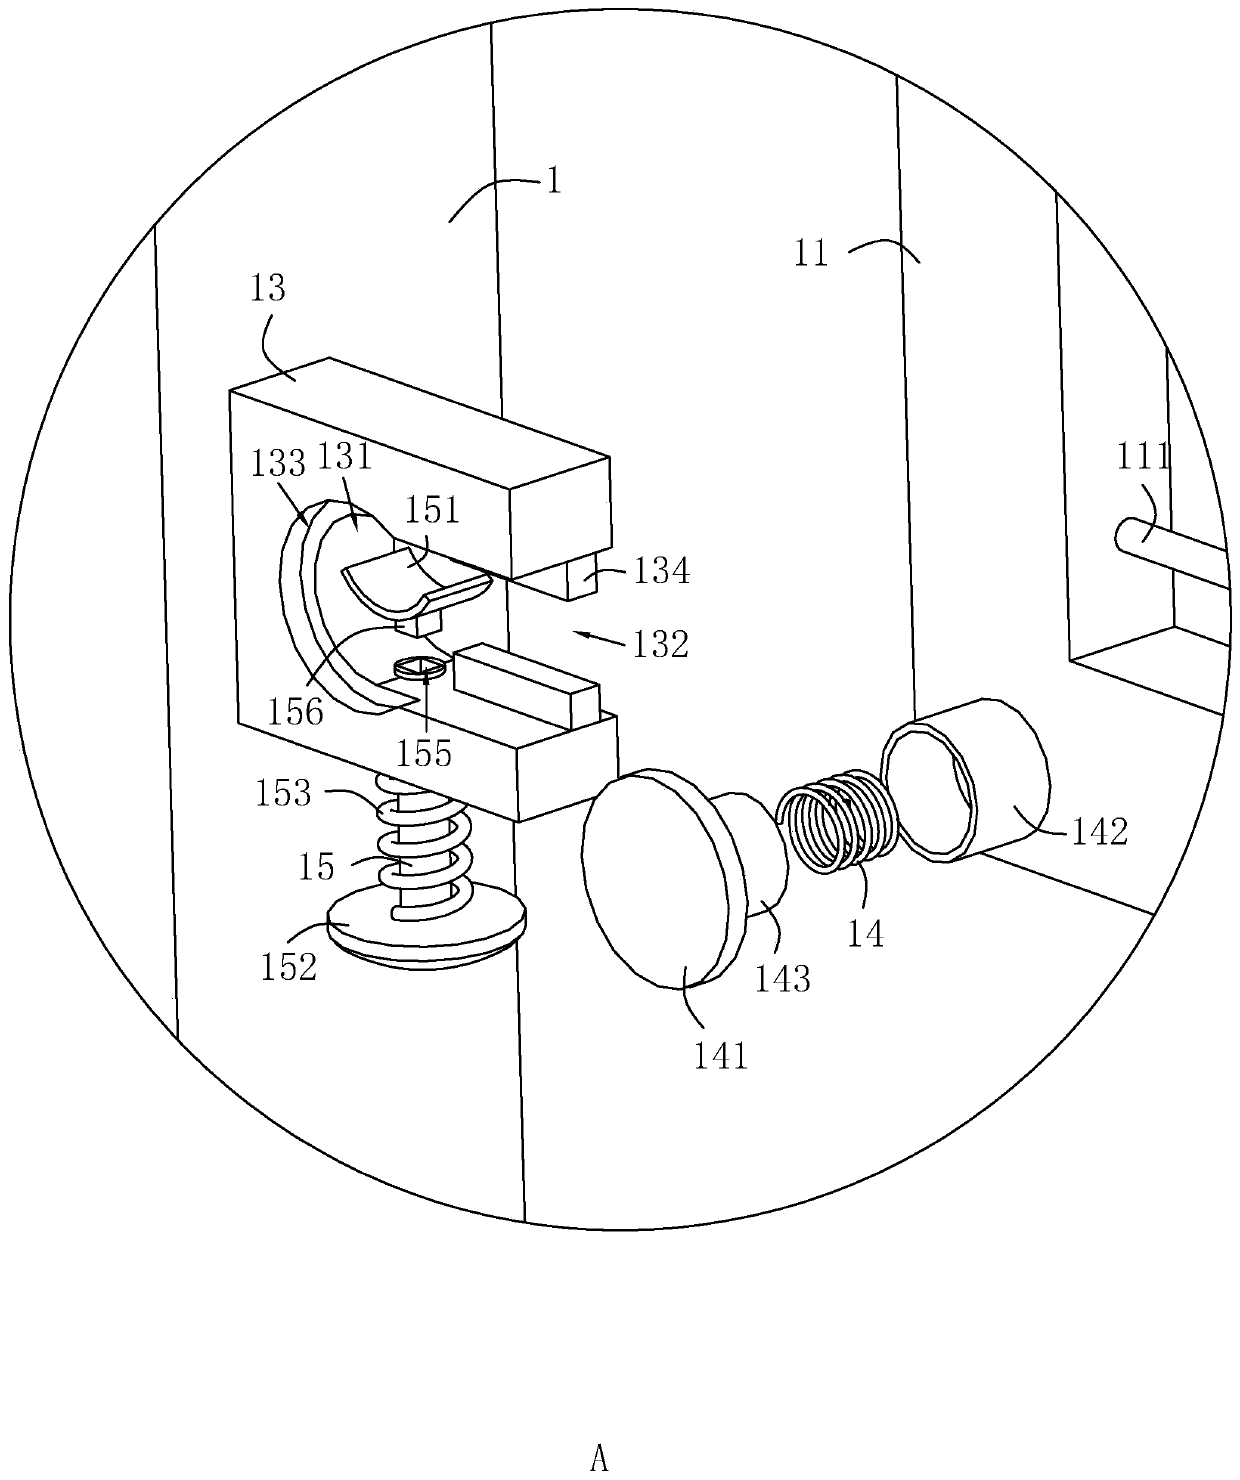 Isolation fence and mounting method thereof